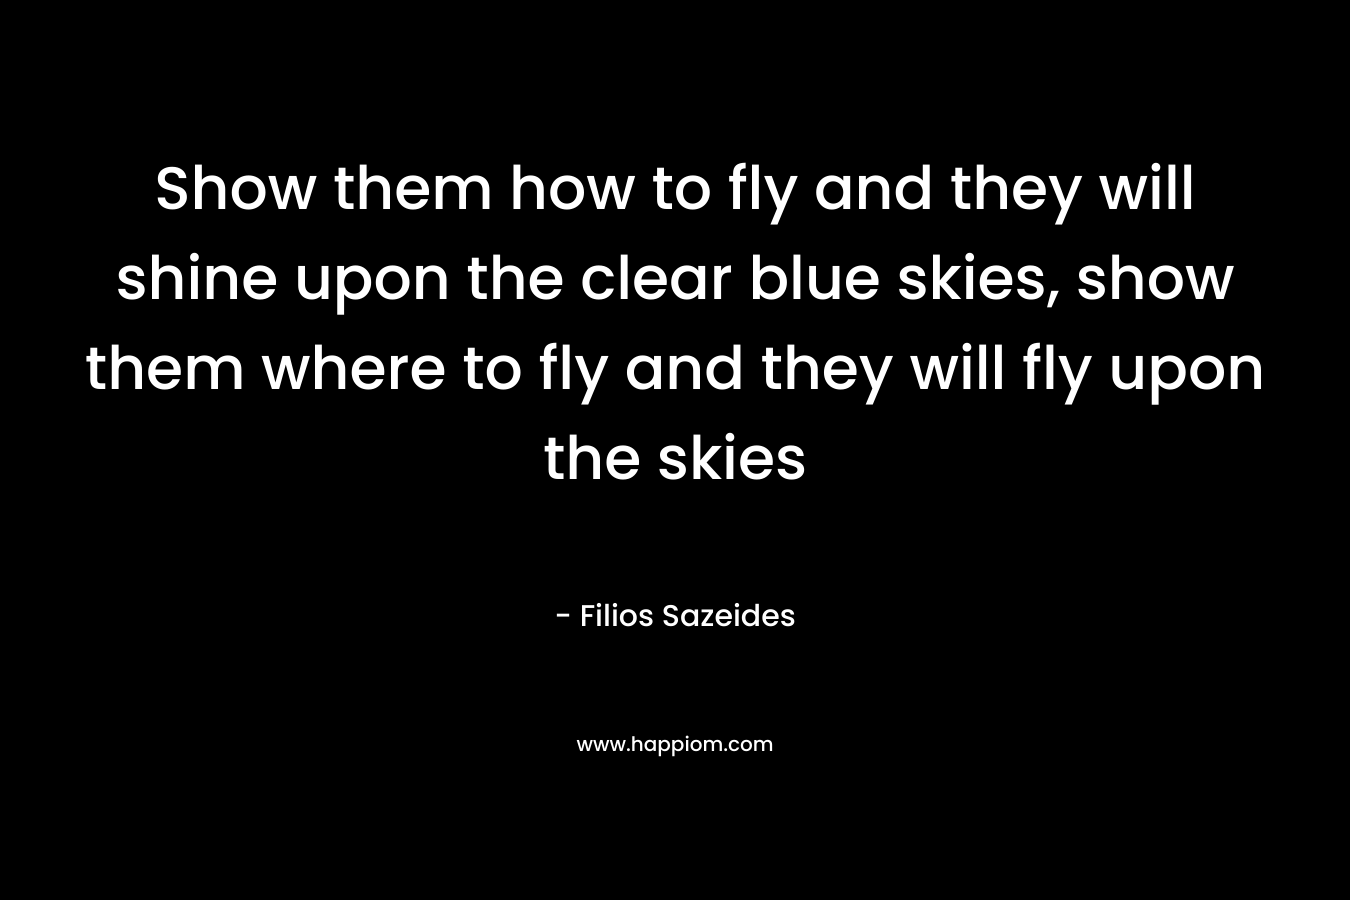 Show them how to fly and they will shine upon the clear blue skies, show them where to fly and they will fly upon the skies